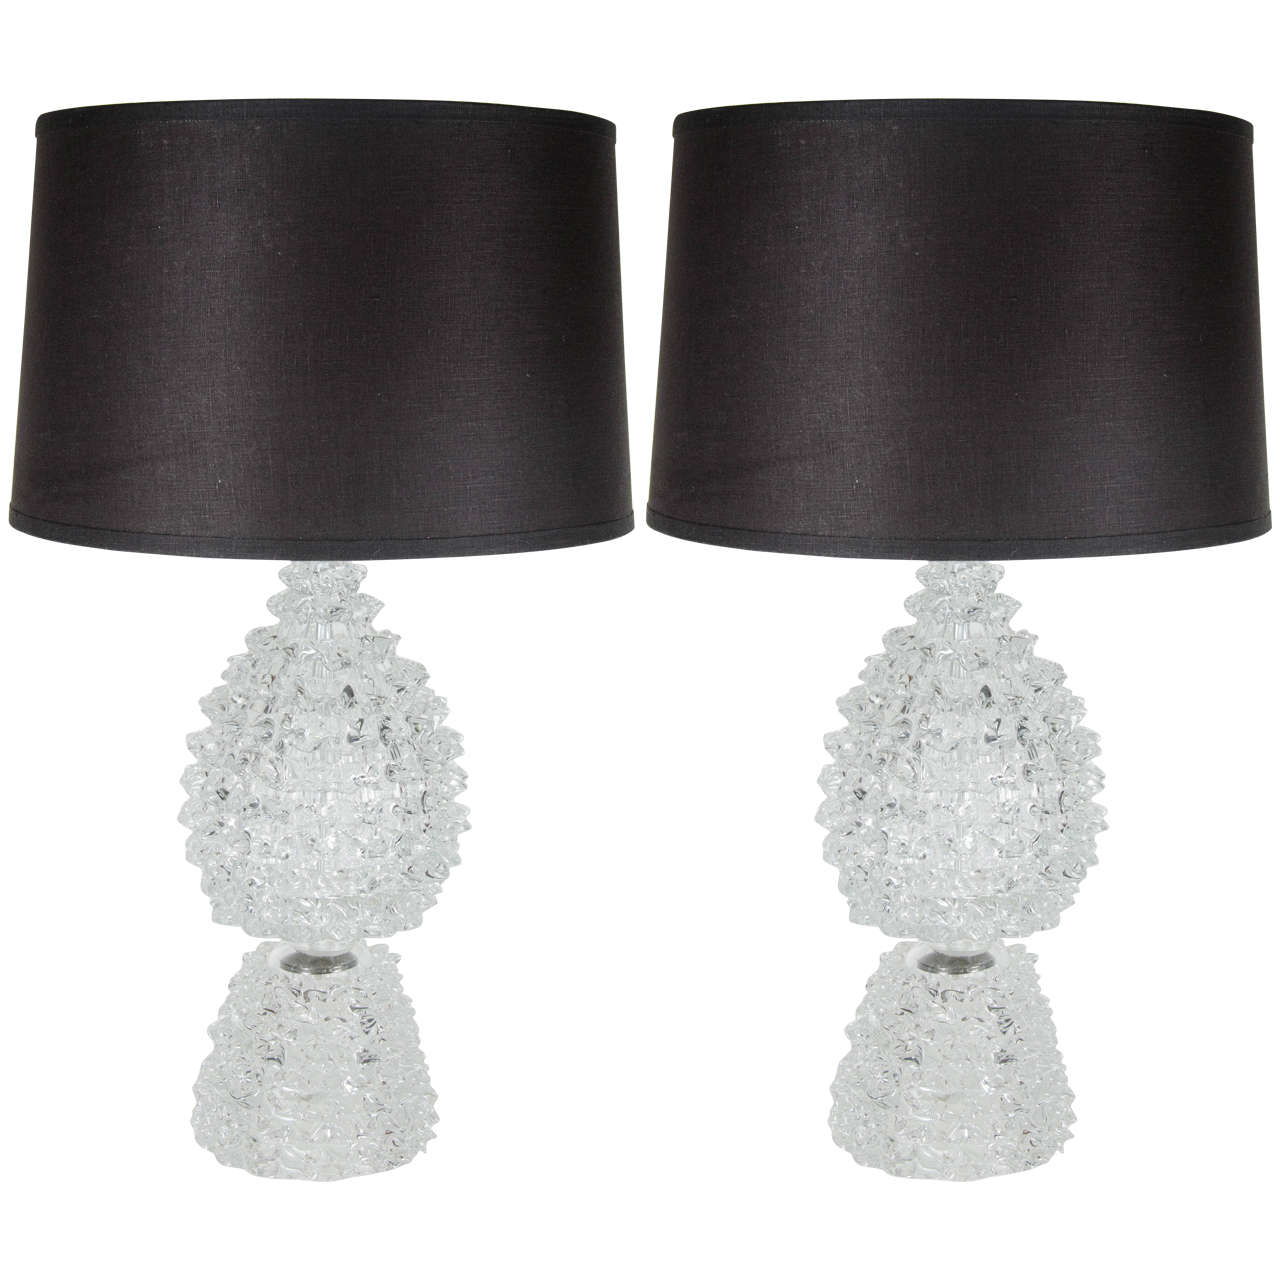 Pair of Mid-Century Modern Glass Spiked Table Lamps by Barovier & Toso